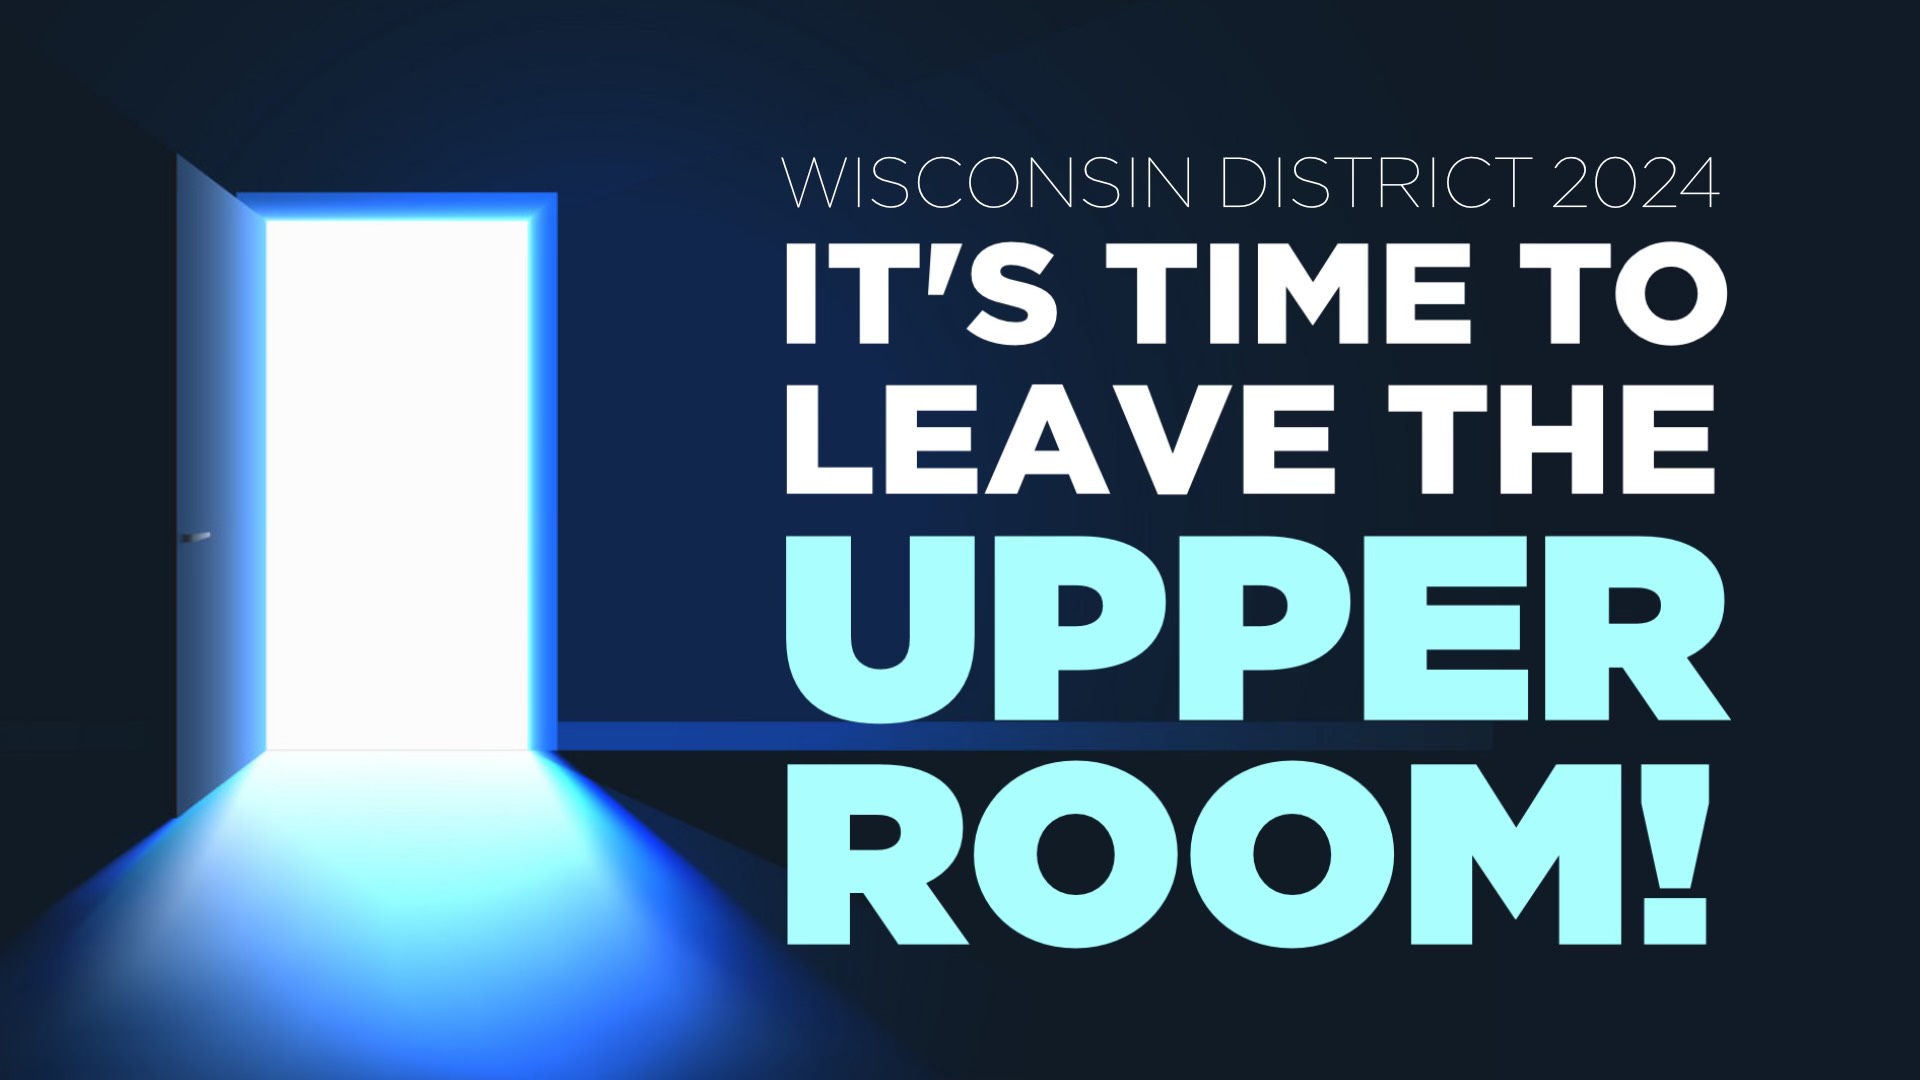 IT'S TIME TO LEAVE THE UPPER ROOM